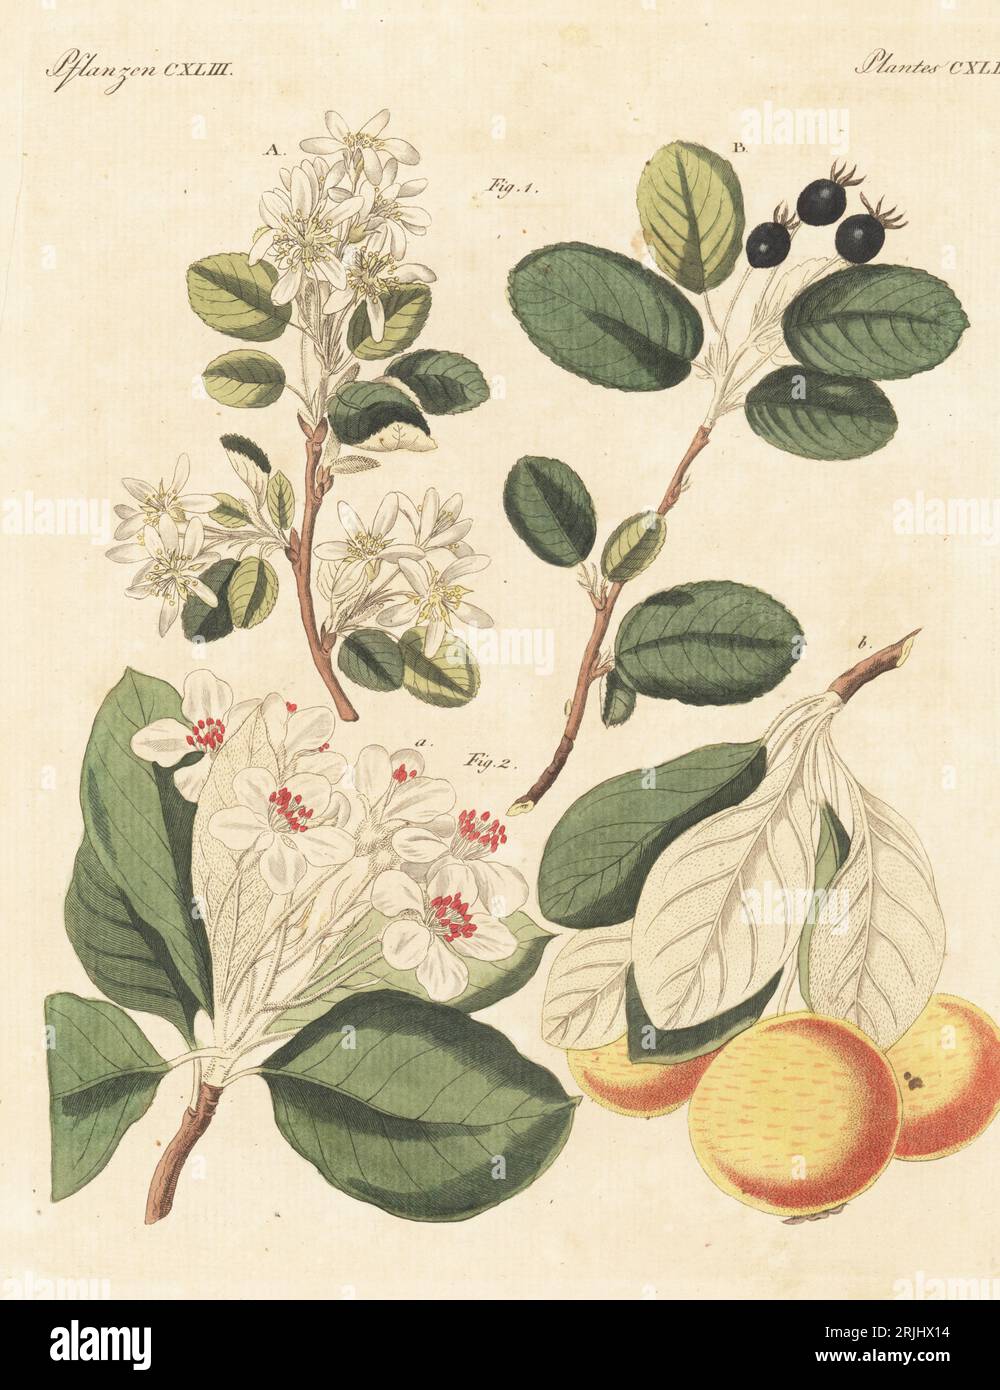 Snowy mespilus, Amelanchier ovalis 1, and yellow pear or snow pear, Pyrus nivalis 2. Blossom A and fruit B. The botanicals were drawn by Henriette and Conrad Westermayr, F. Götz and C. Ermer. Handcoloured copperplate engraving from Carl Bertuch's Bilderbuch fur Kinder (Picture Book for Children), Weimar, 1813. A 12-volume encyclopedia for children illustrated with almost 1,200 engraved plates on natural history, science, costume, mythology, etc., published from 1790-1830. Stock Photo